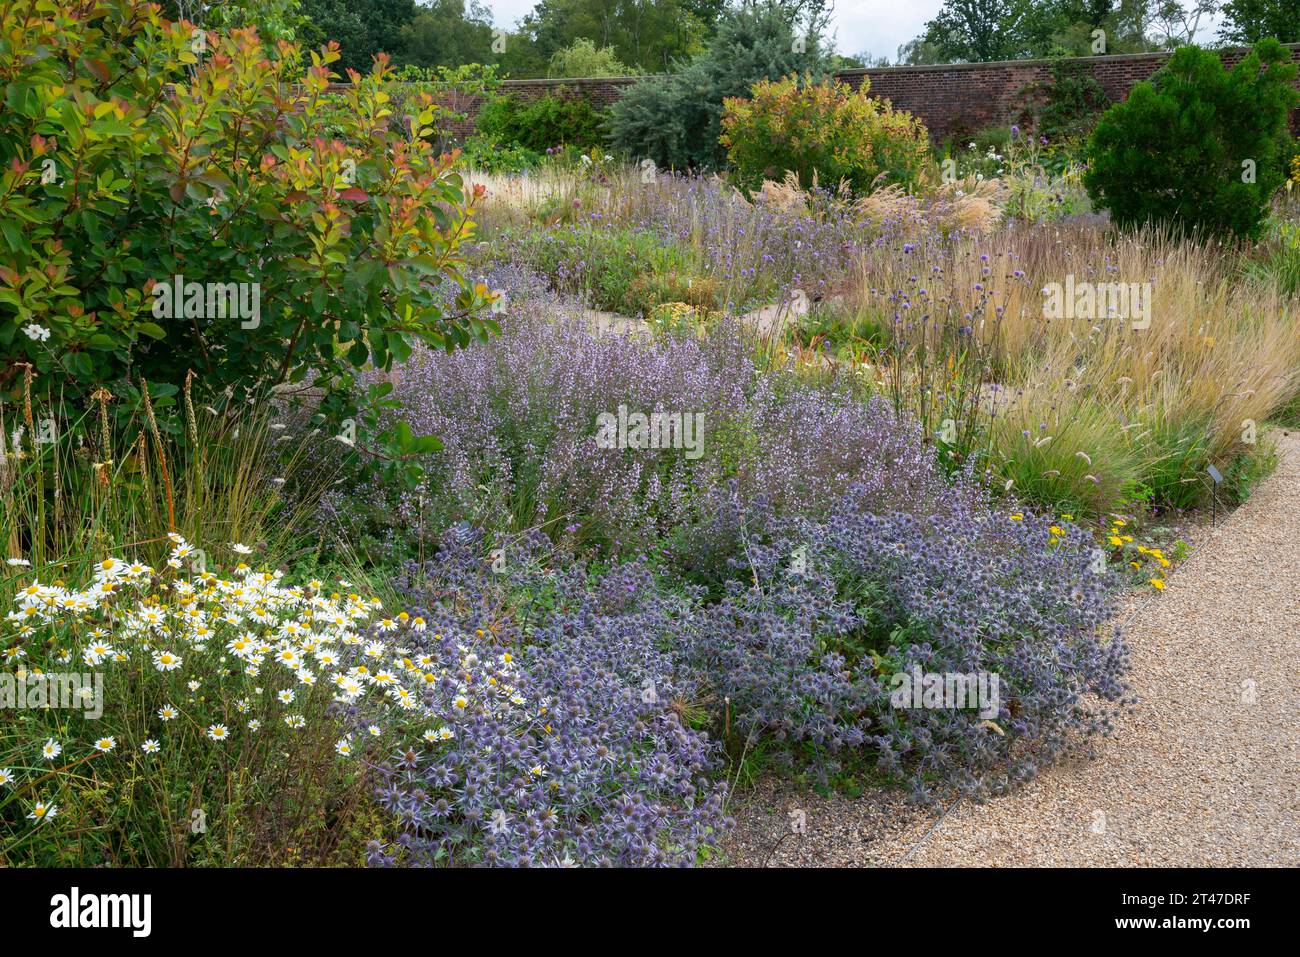 Summer in the gardens at RHS Bridgewater, Worsley, Salford, England. Mixed planting in the Paradise Garden. Stock Photo